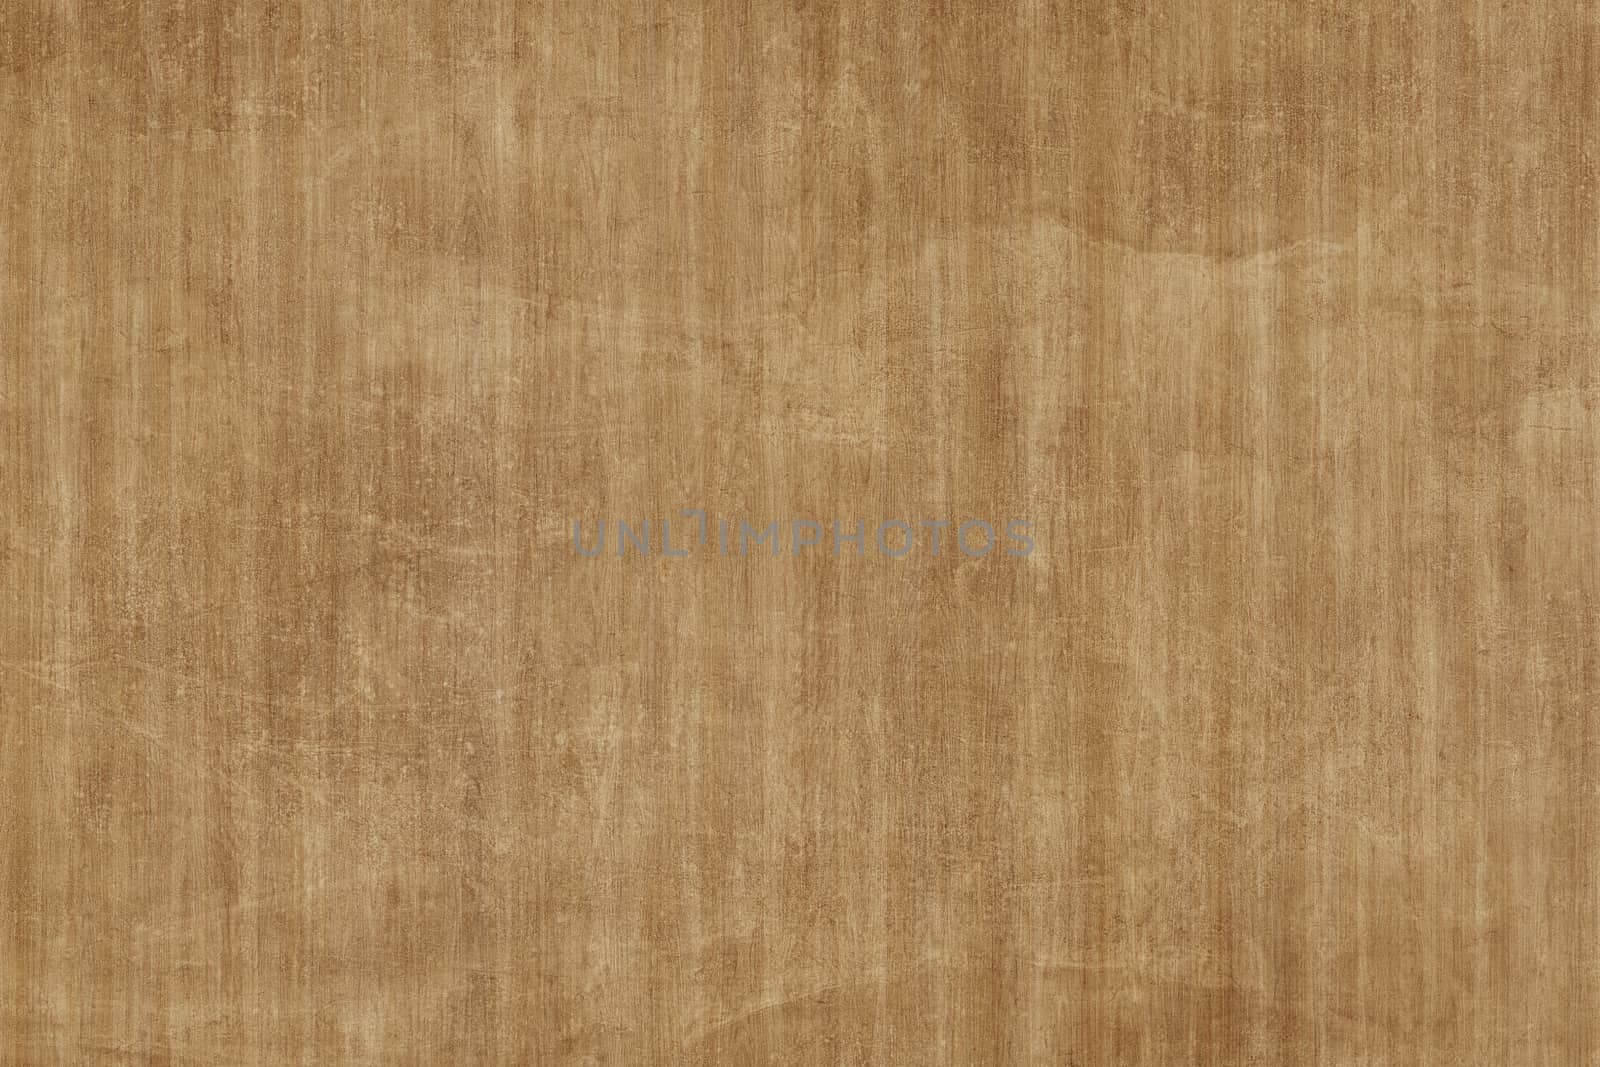 Brown wood texture. Abstract background. wood background by ivo_13